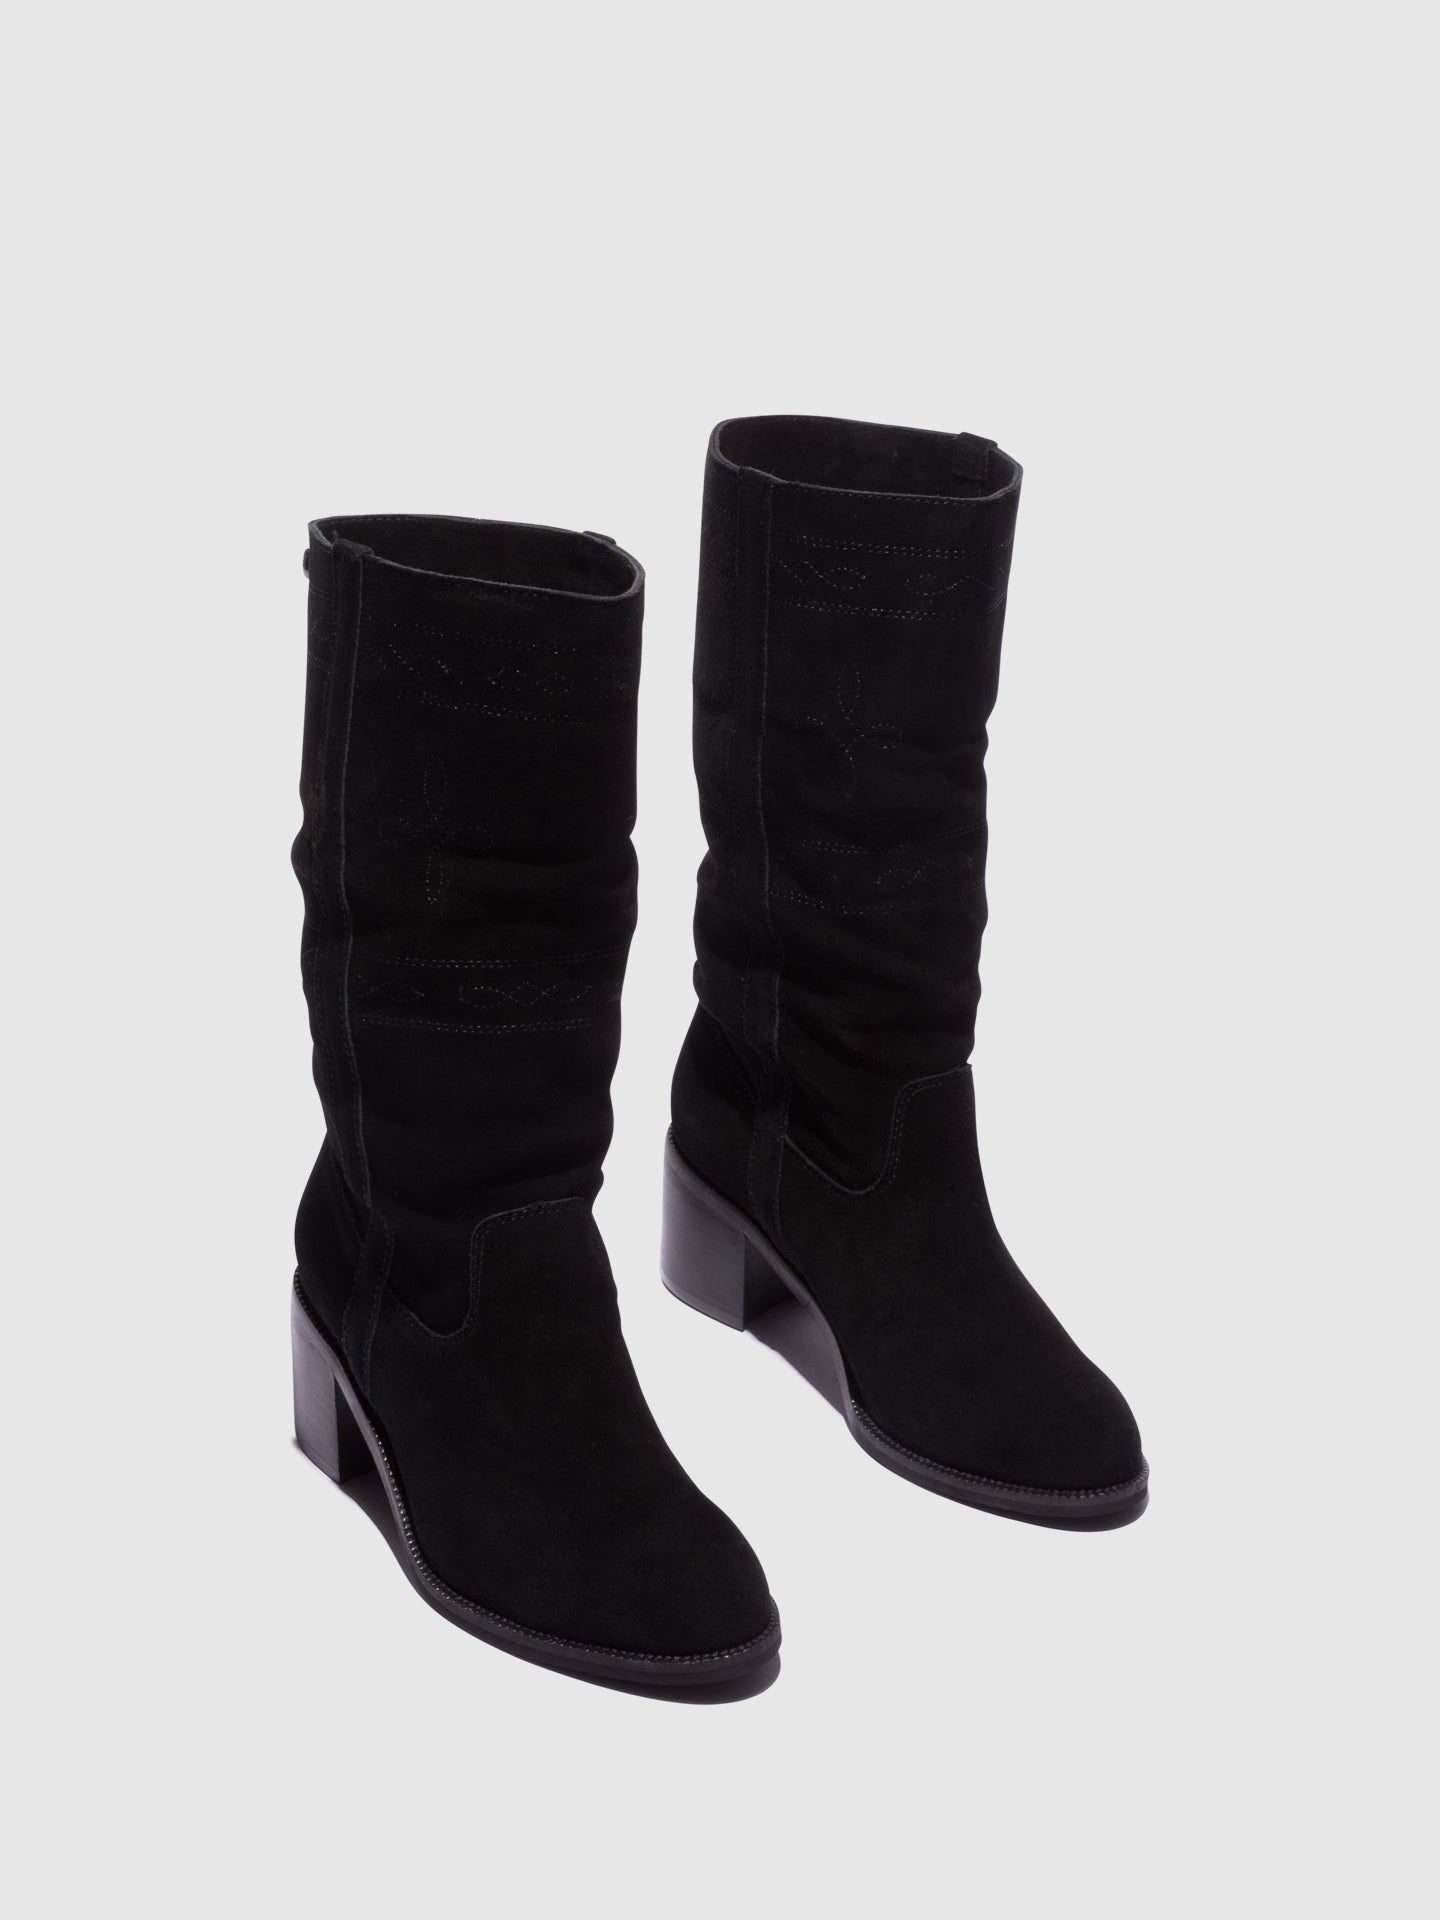 Top3 Black Round Toe Boots